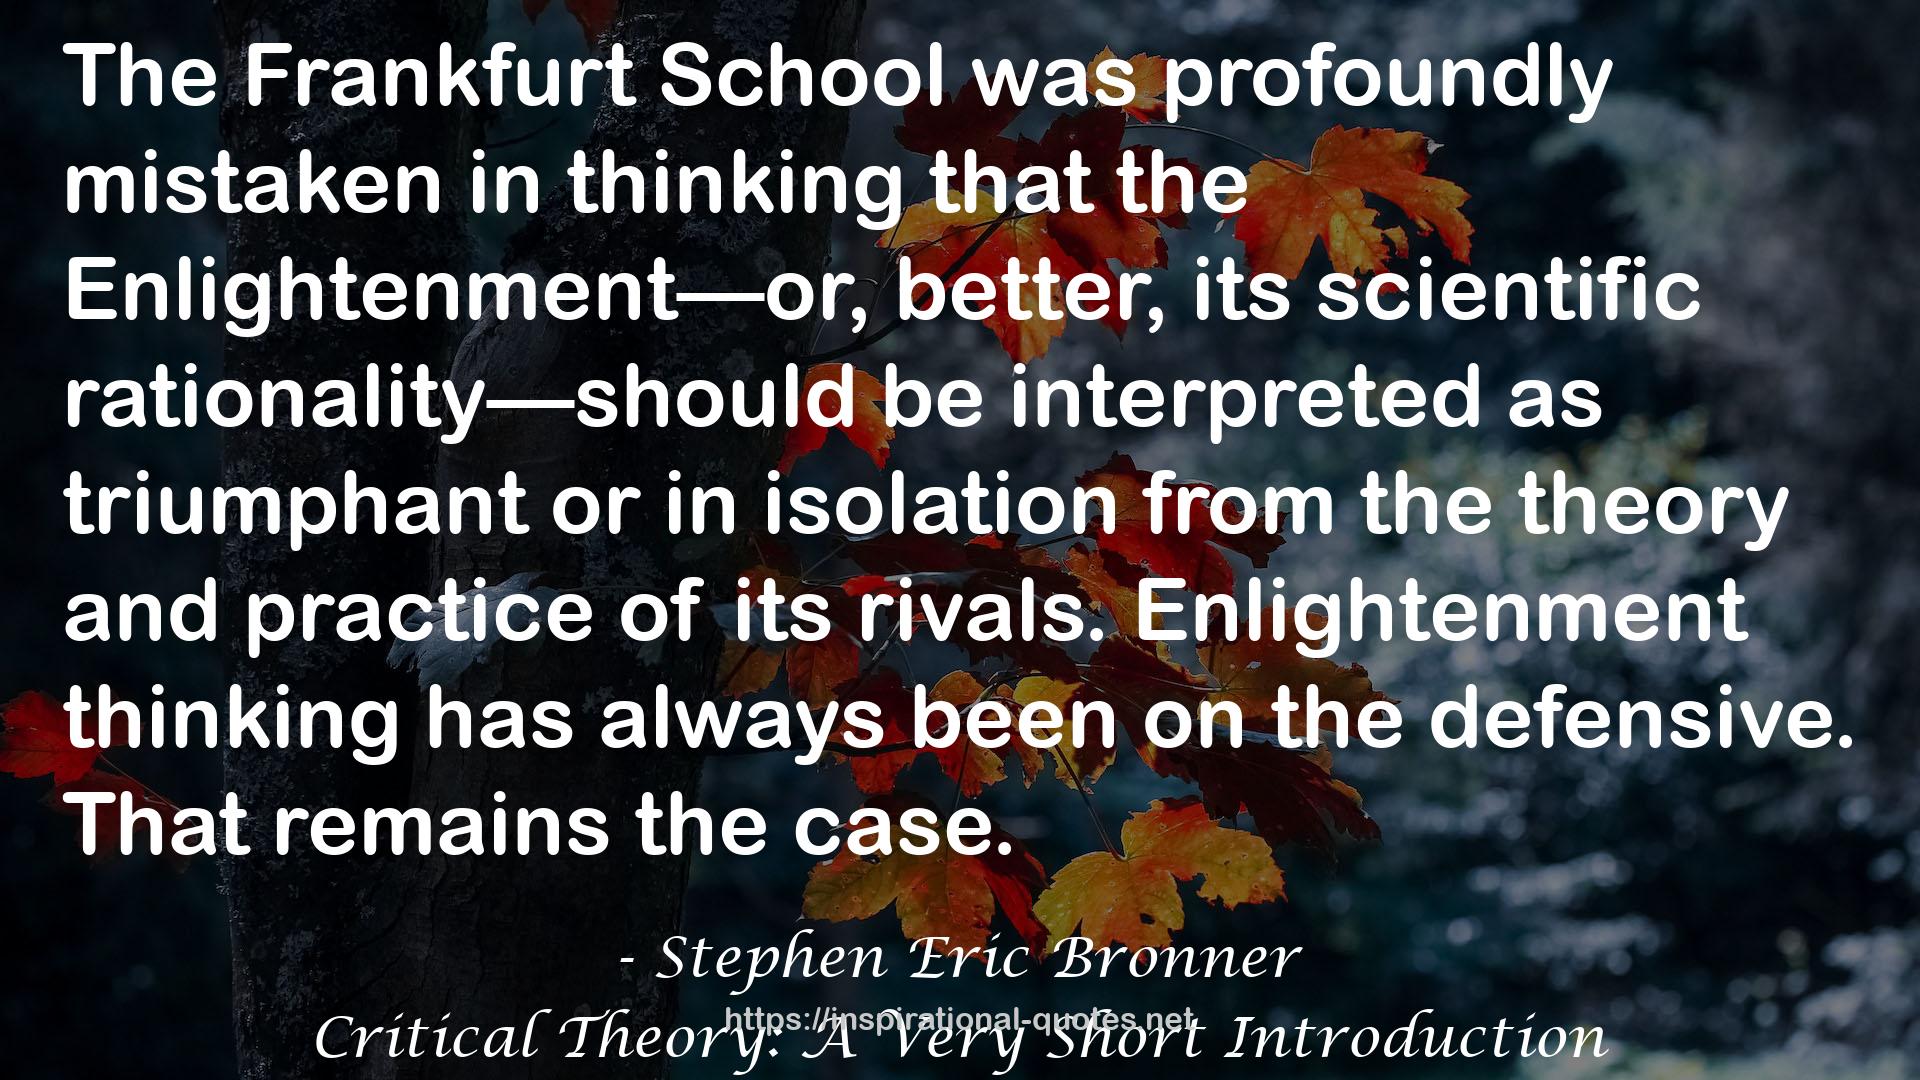 Critical Theory: A Very Short Introduction QUOTES